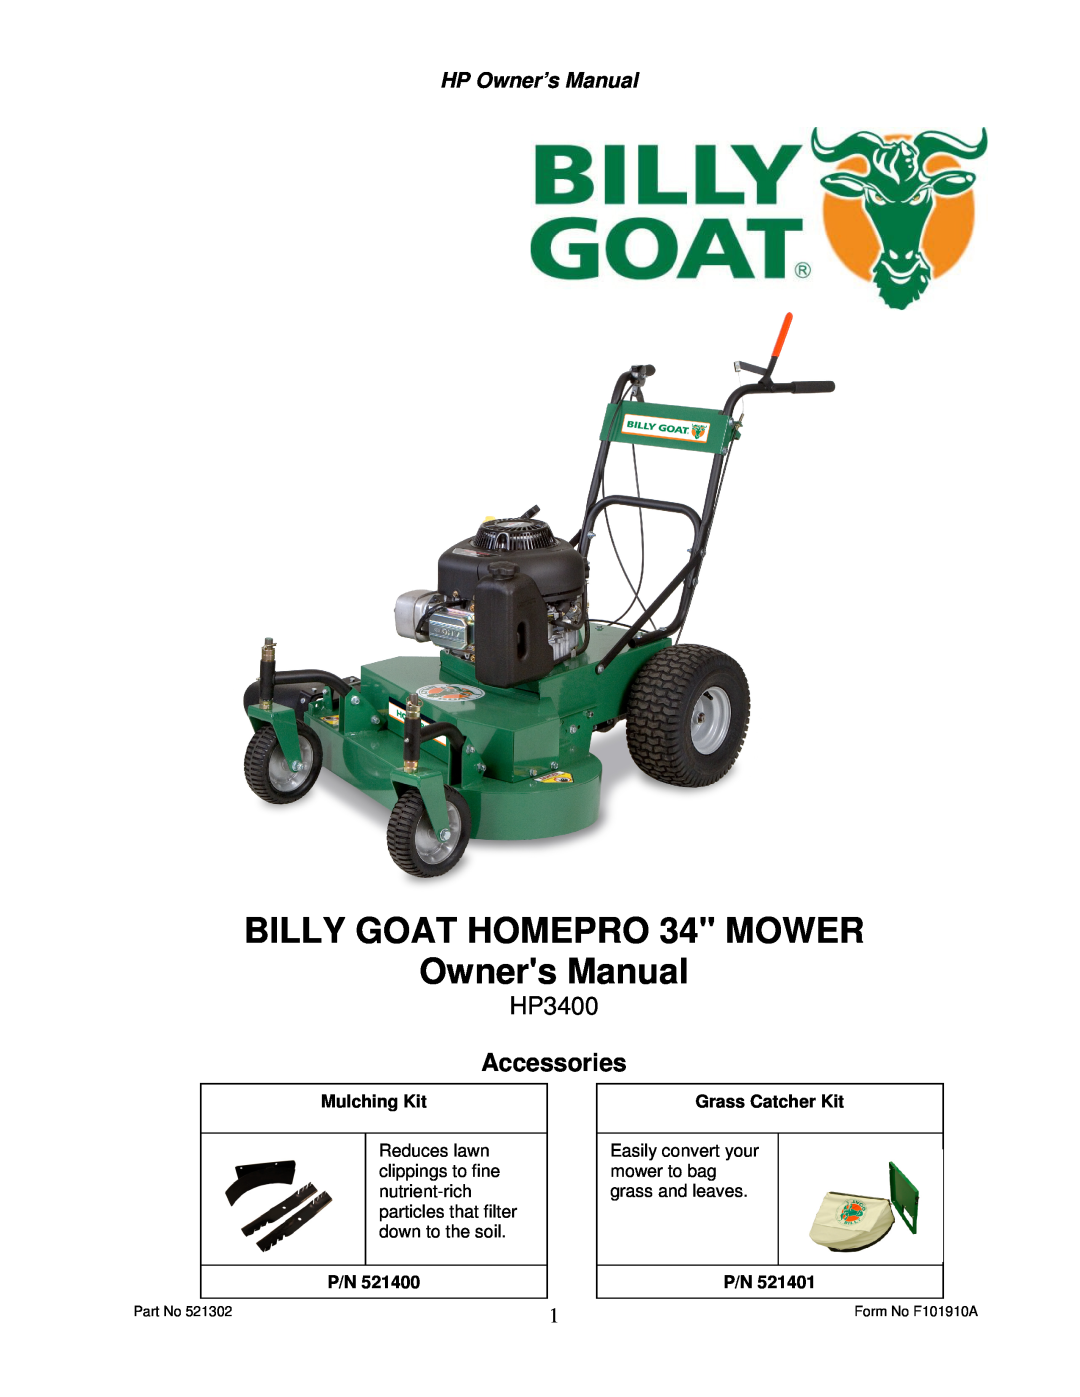 Billy Goat HP3400 owner manual Accessories, HP Owner’s Manual, BILLY GOAT HOMEPRO 34 MOWER Owners Manual, Mulching Kit 